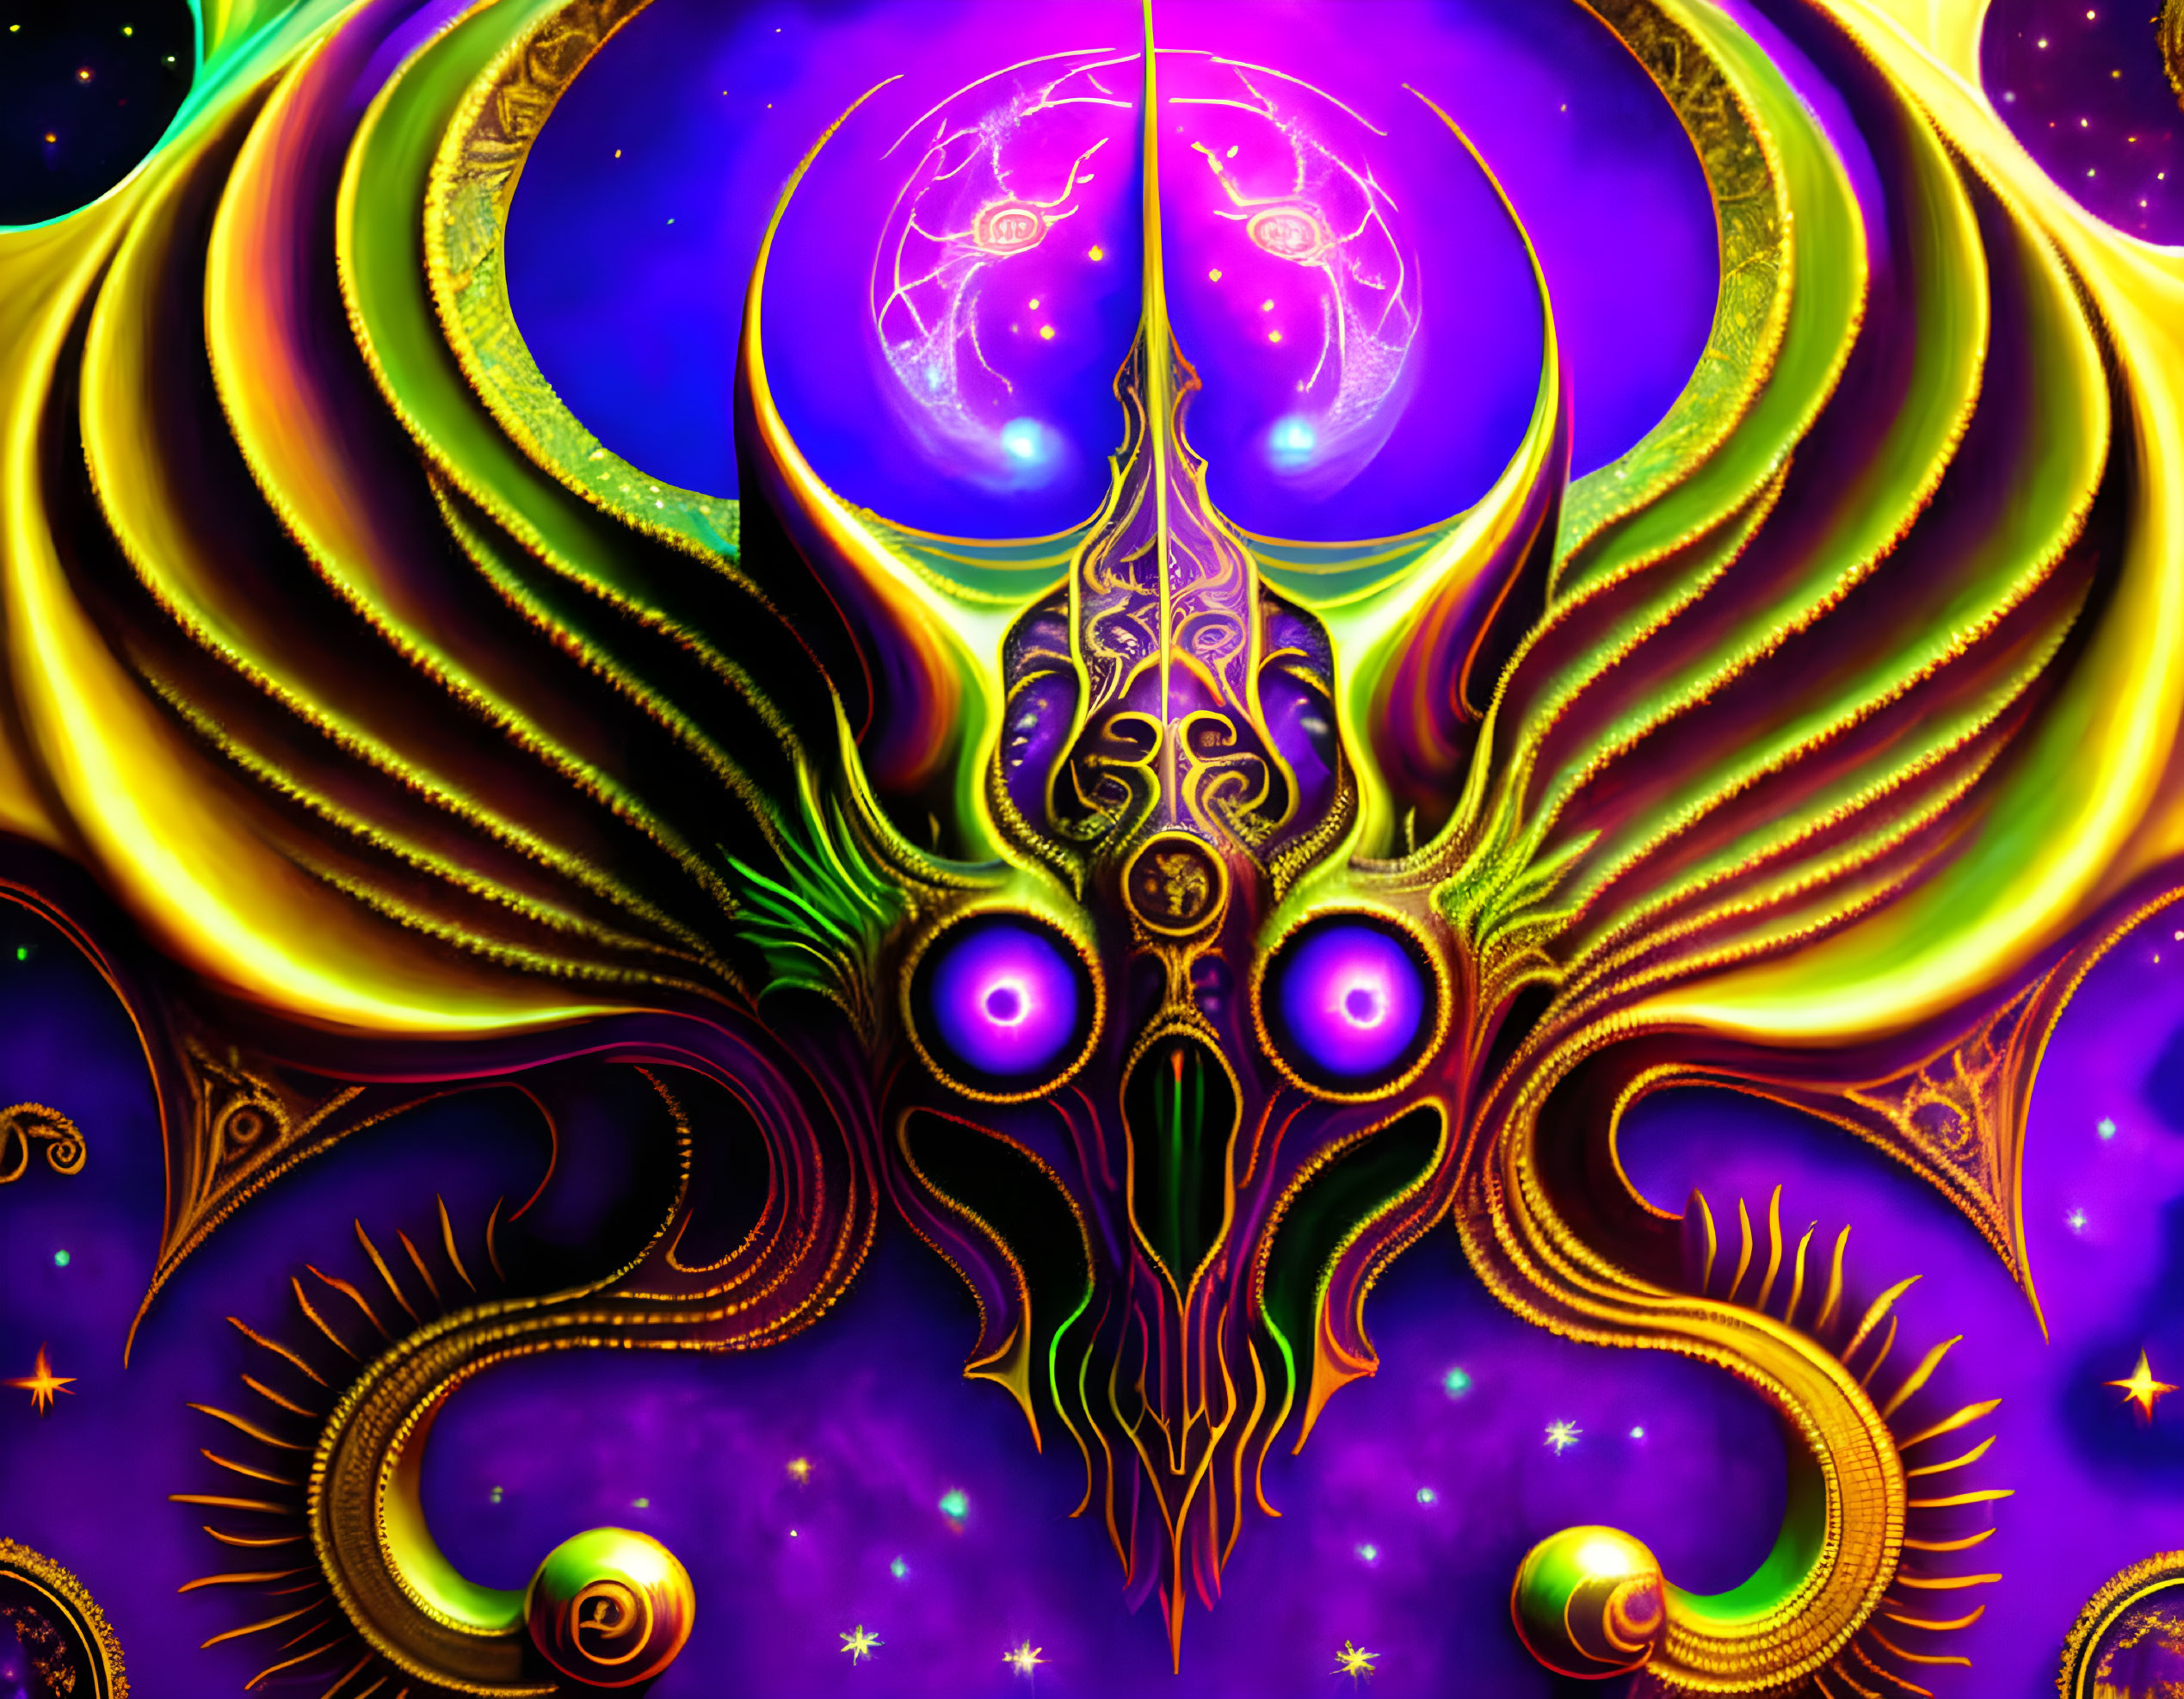 Colorful Psychedelic Fractal Art with Abstract Butterfly Shapes